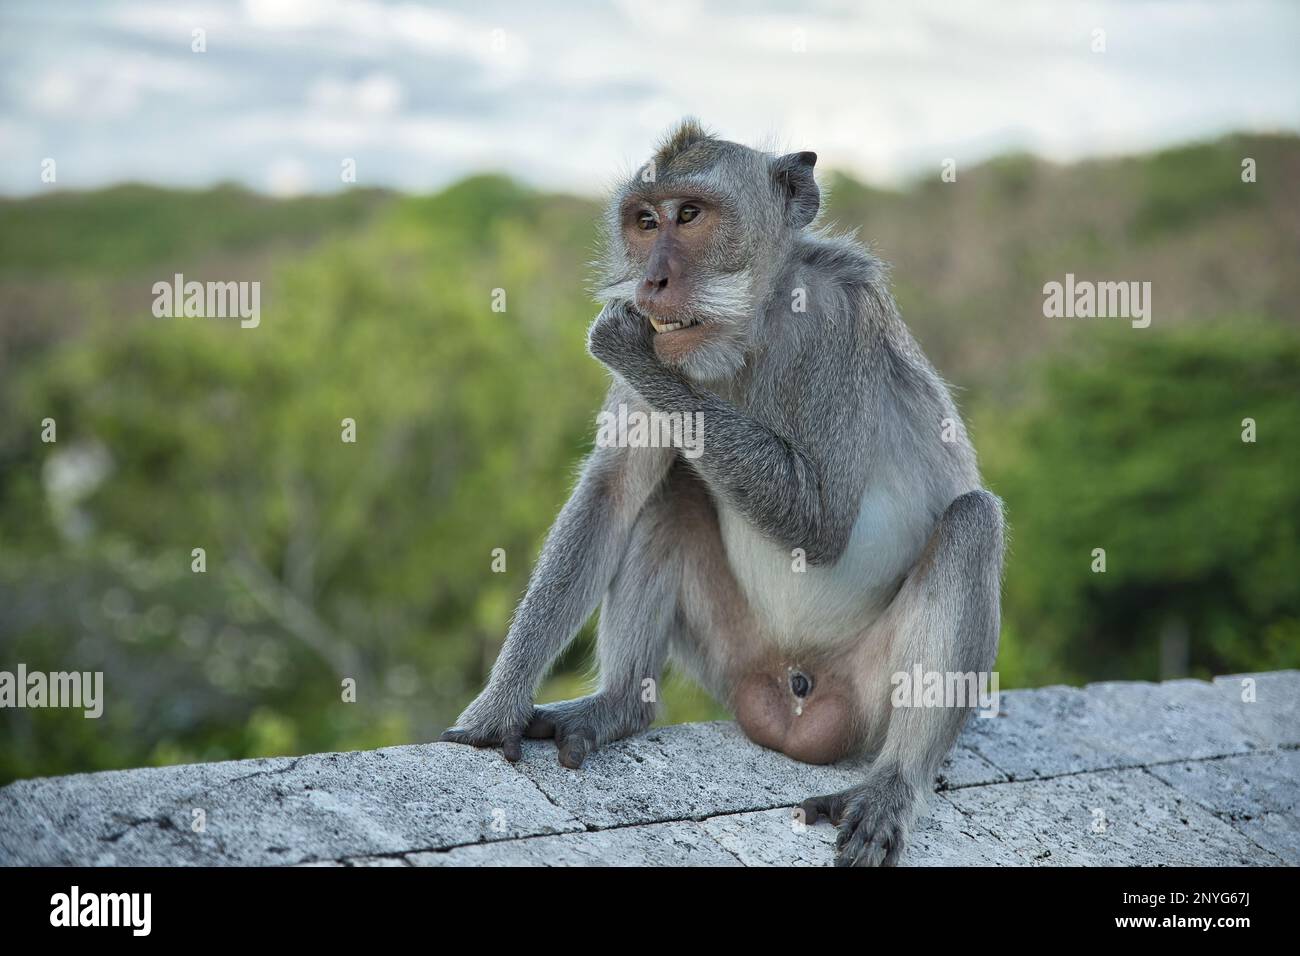 Full body close up of an adult cynomolgus monkey sitting on a stone wall,  diffuse trees and sky in the background Stock Photo - Alamy